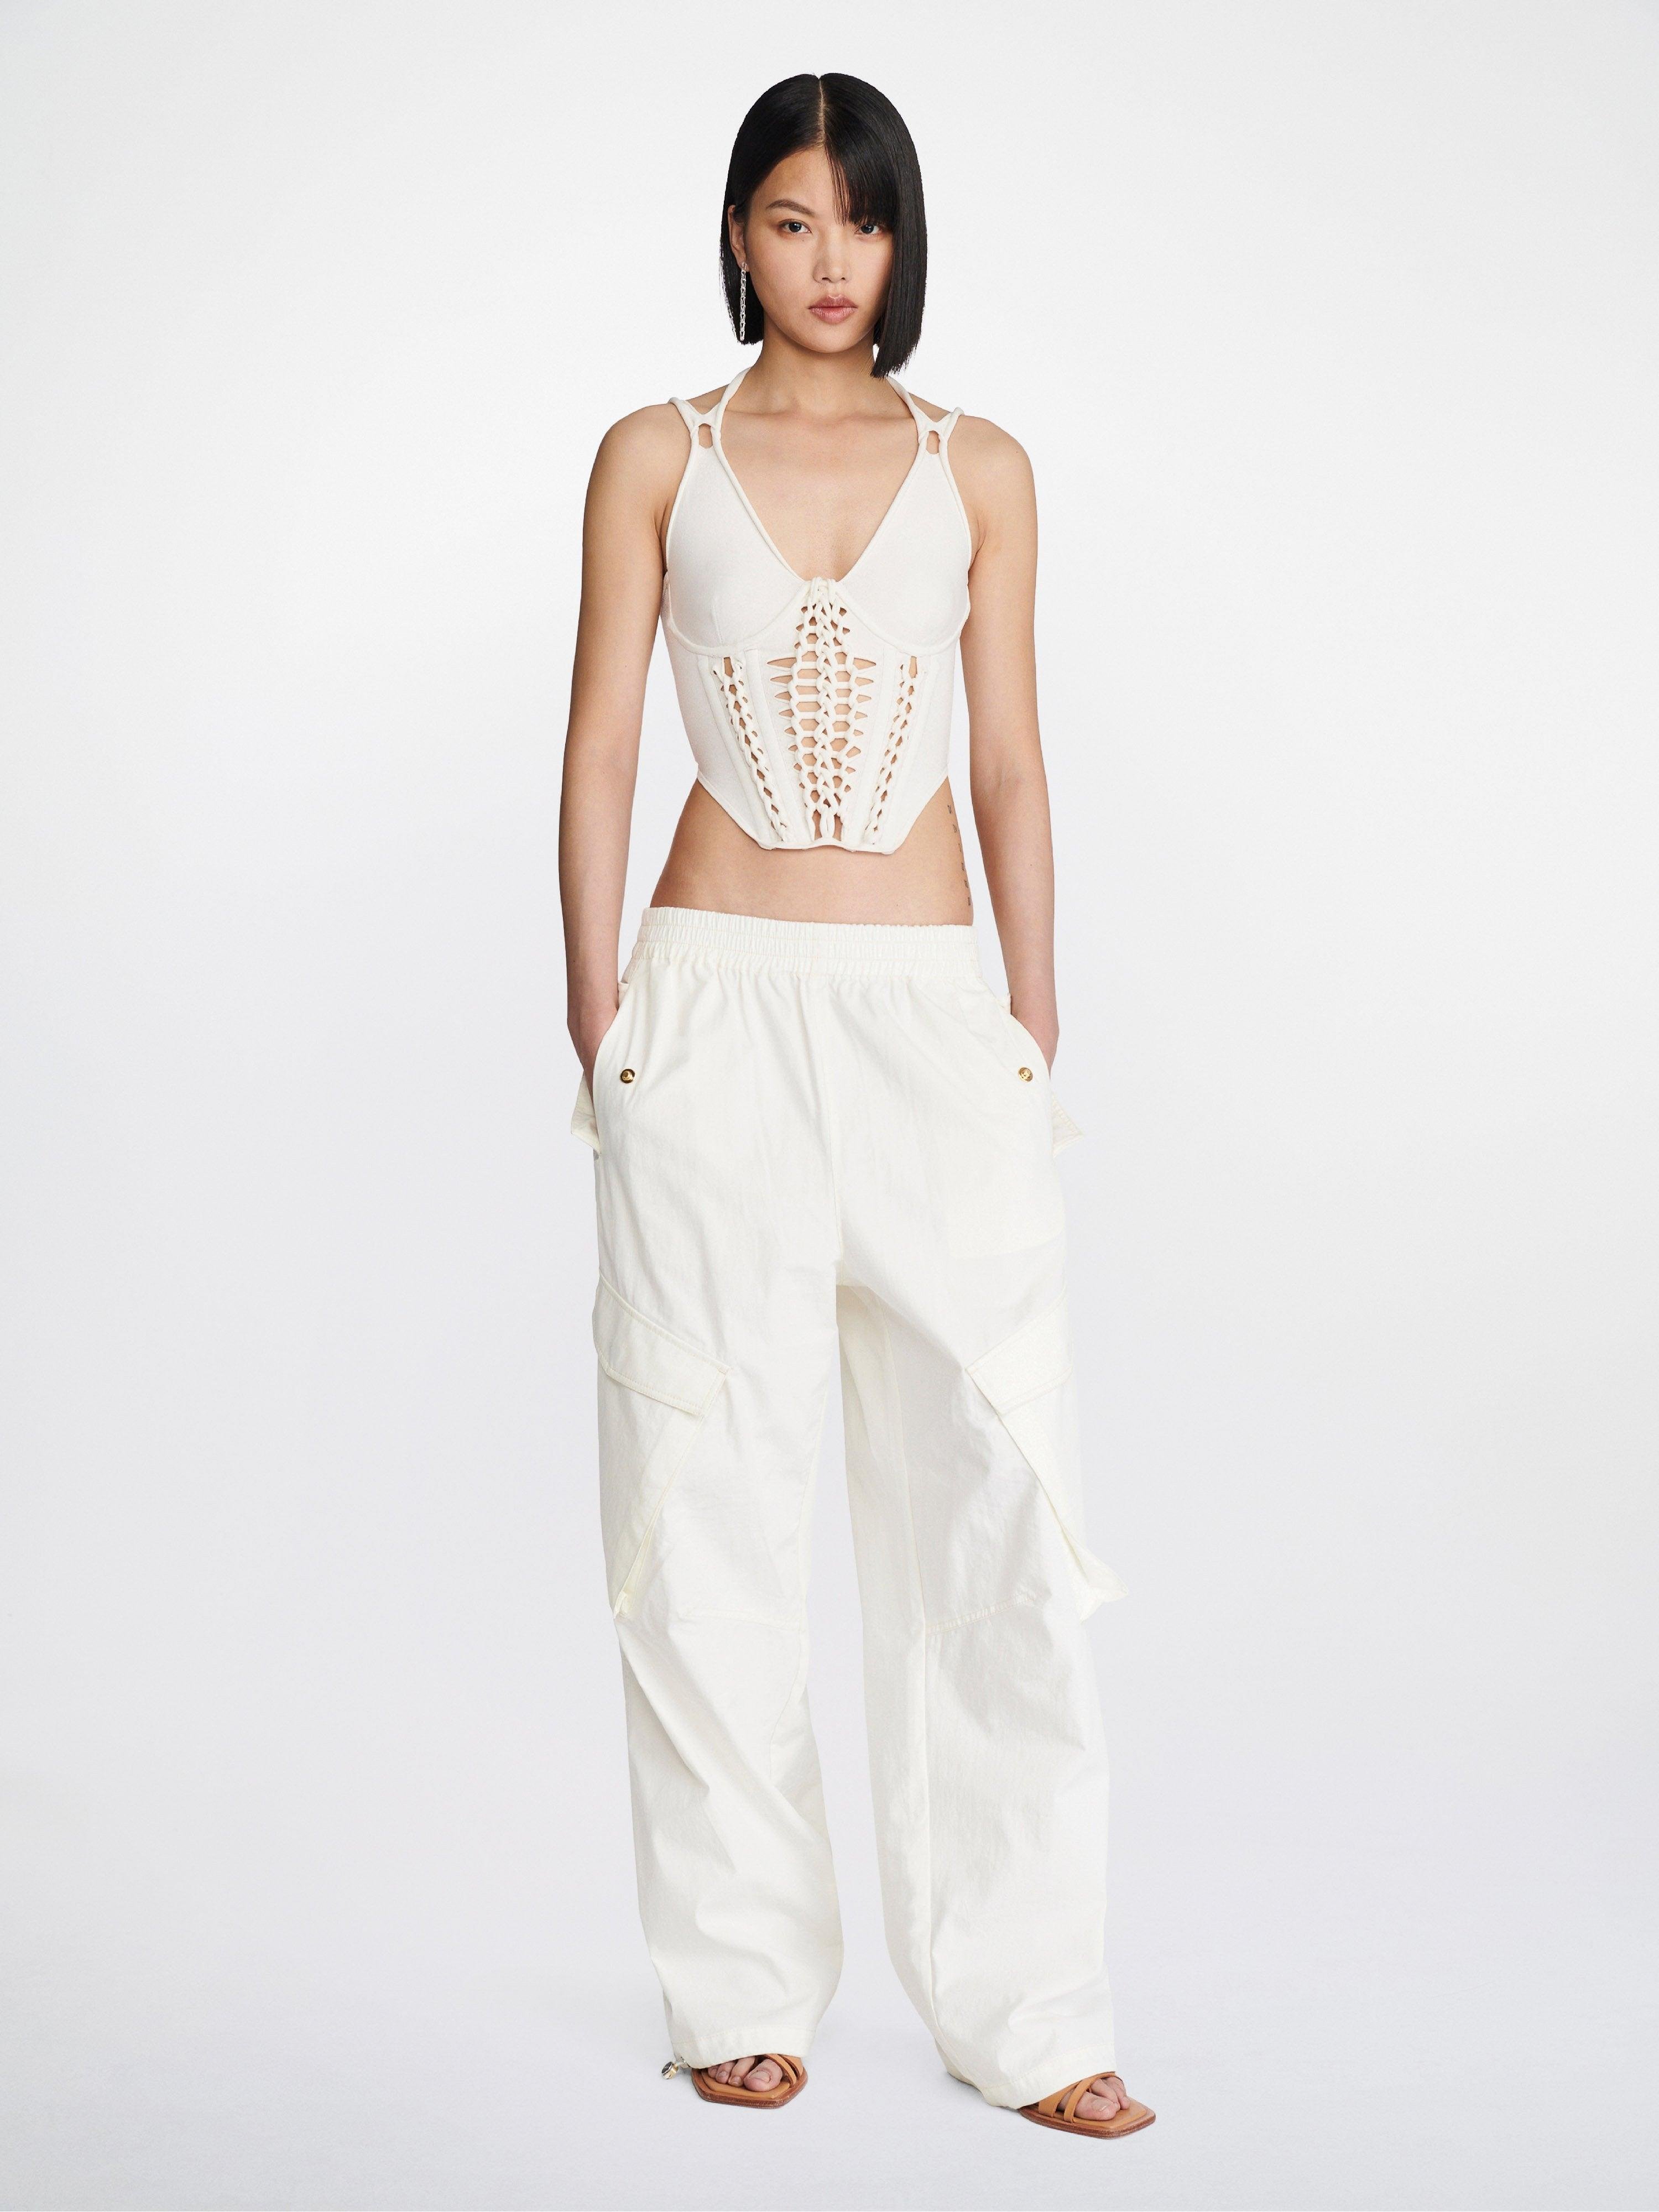 BRAIDED CORSET by DION LEE